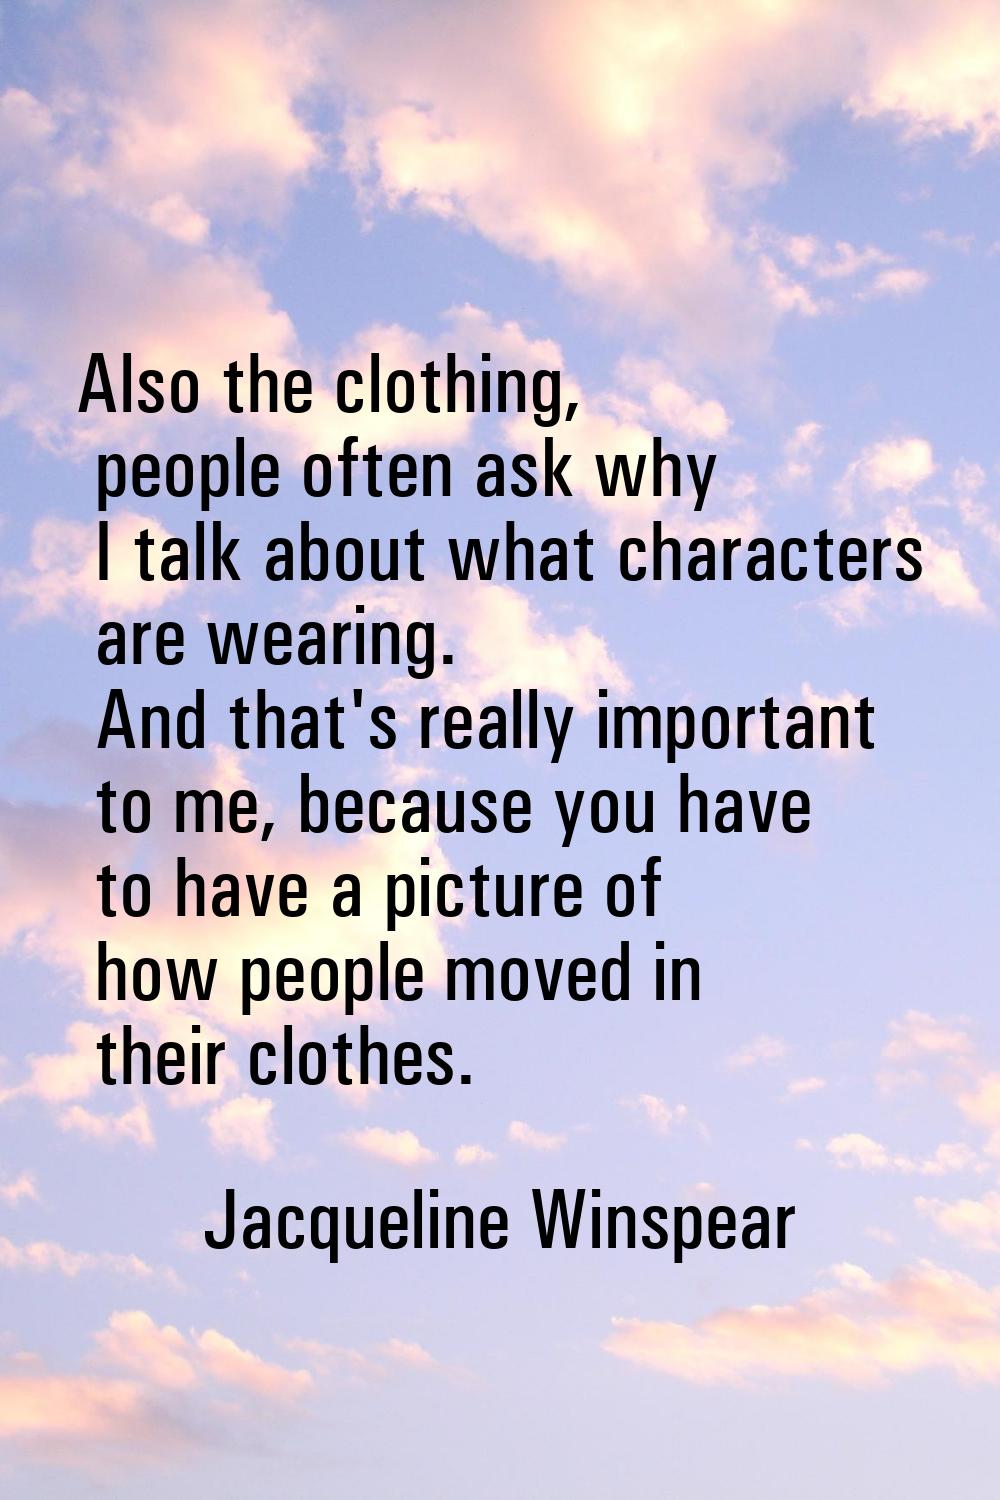 Also the clothing, people often ask why I talk about what characters are wearing. And that's really